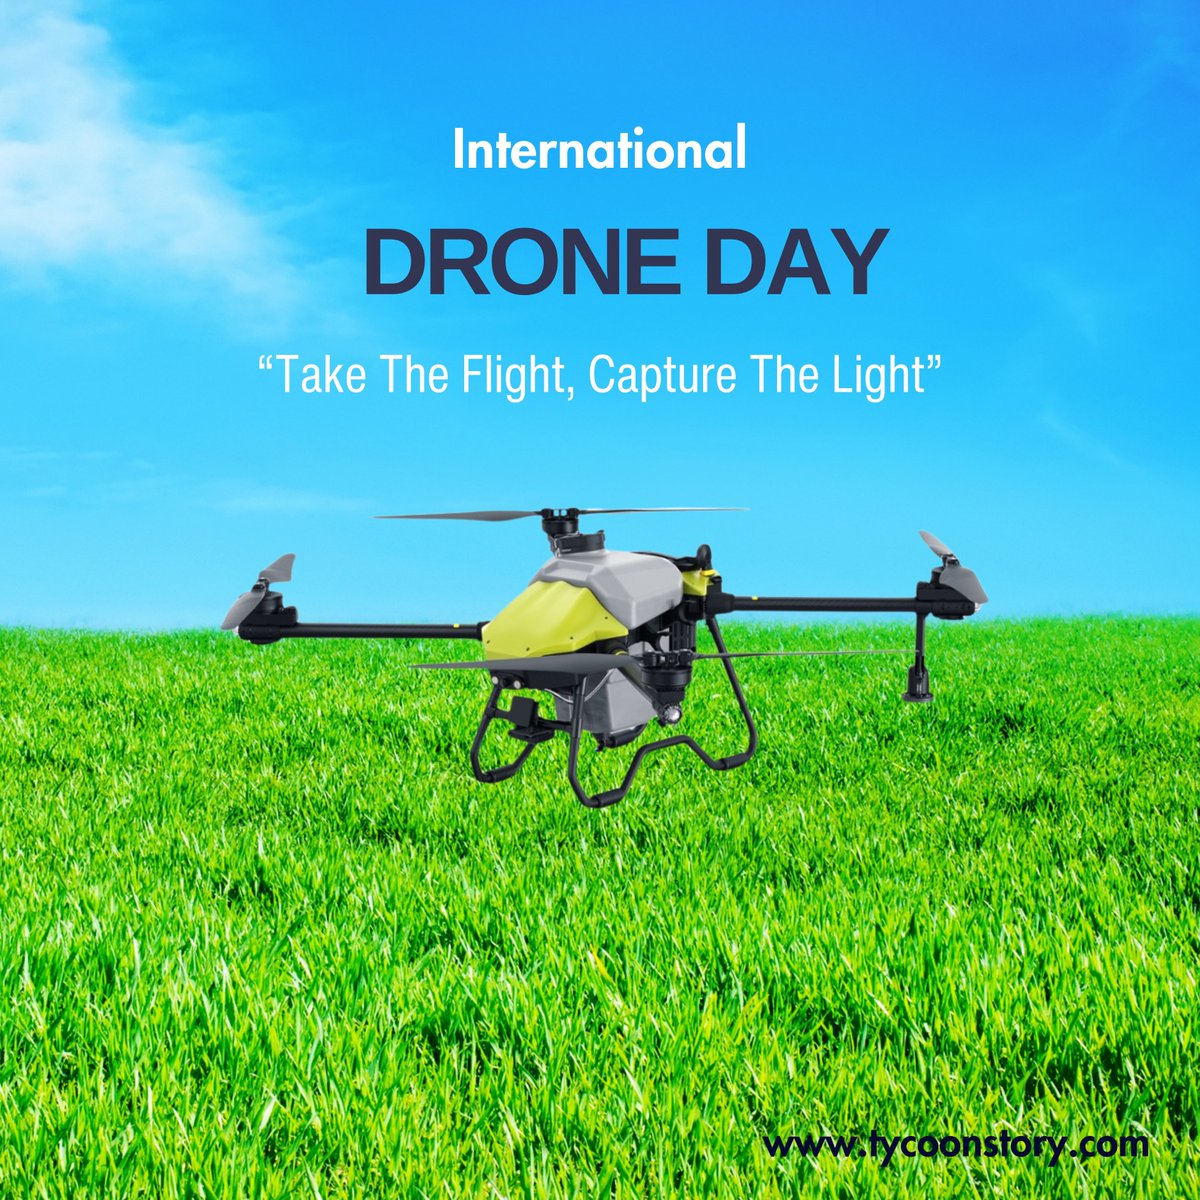 Celebrating the future of flight: Drone Day!
#DroneDay #drones #UAV #UnmannedAerialVehicles #DroneLife #DronePhotography #AerialPhotography #DroneVideography #DronesForGood #DronesMakingADifference #DroneTechnology #DronesInAction #AgTech @TycoonStoryCo @tycoonstory2020